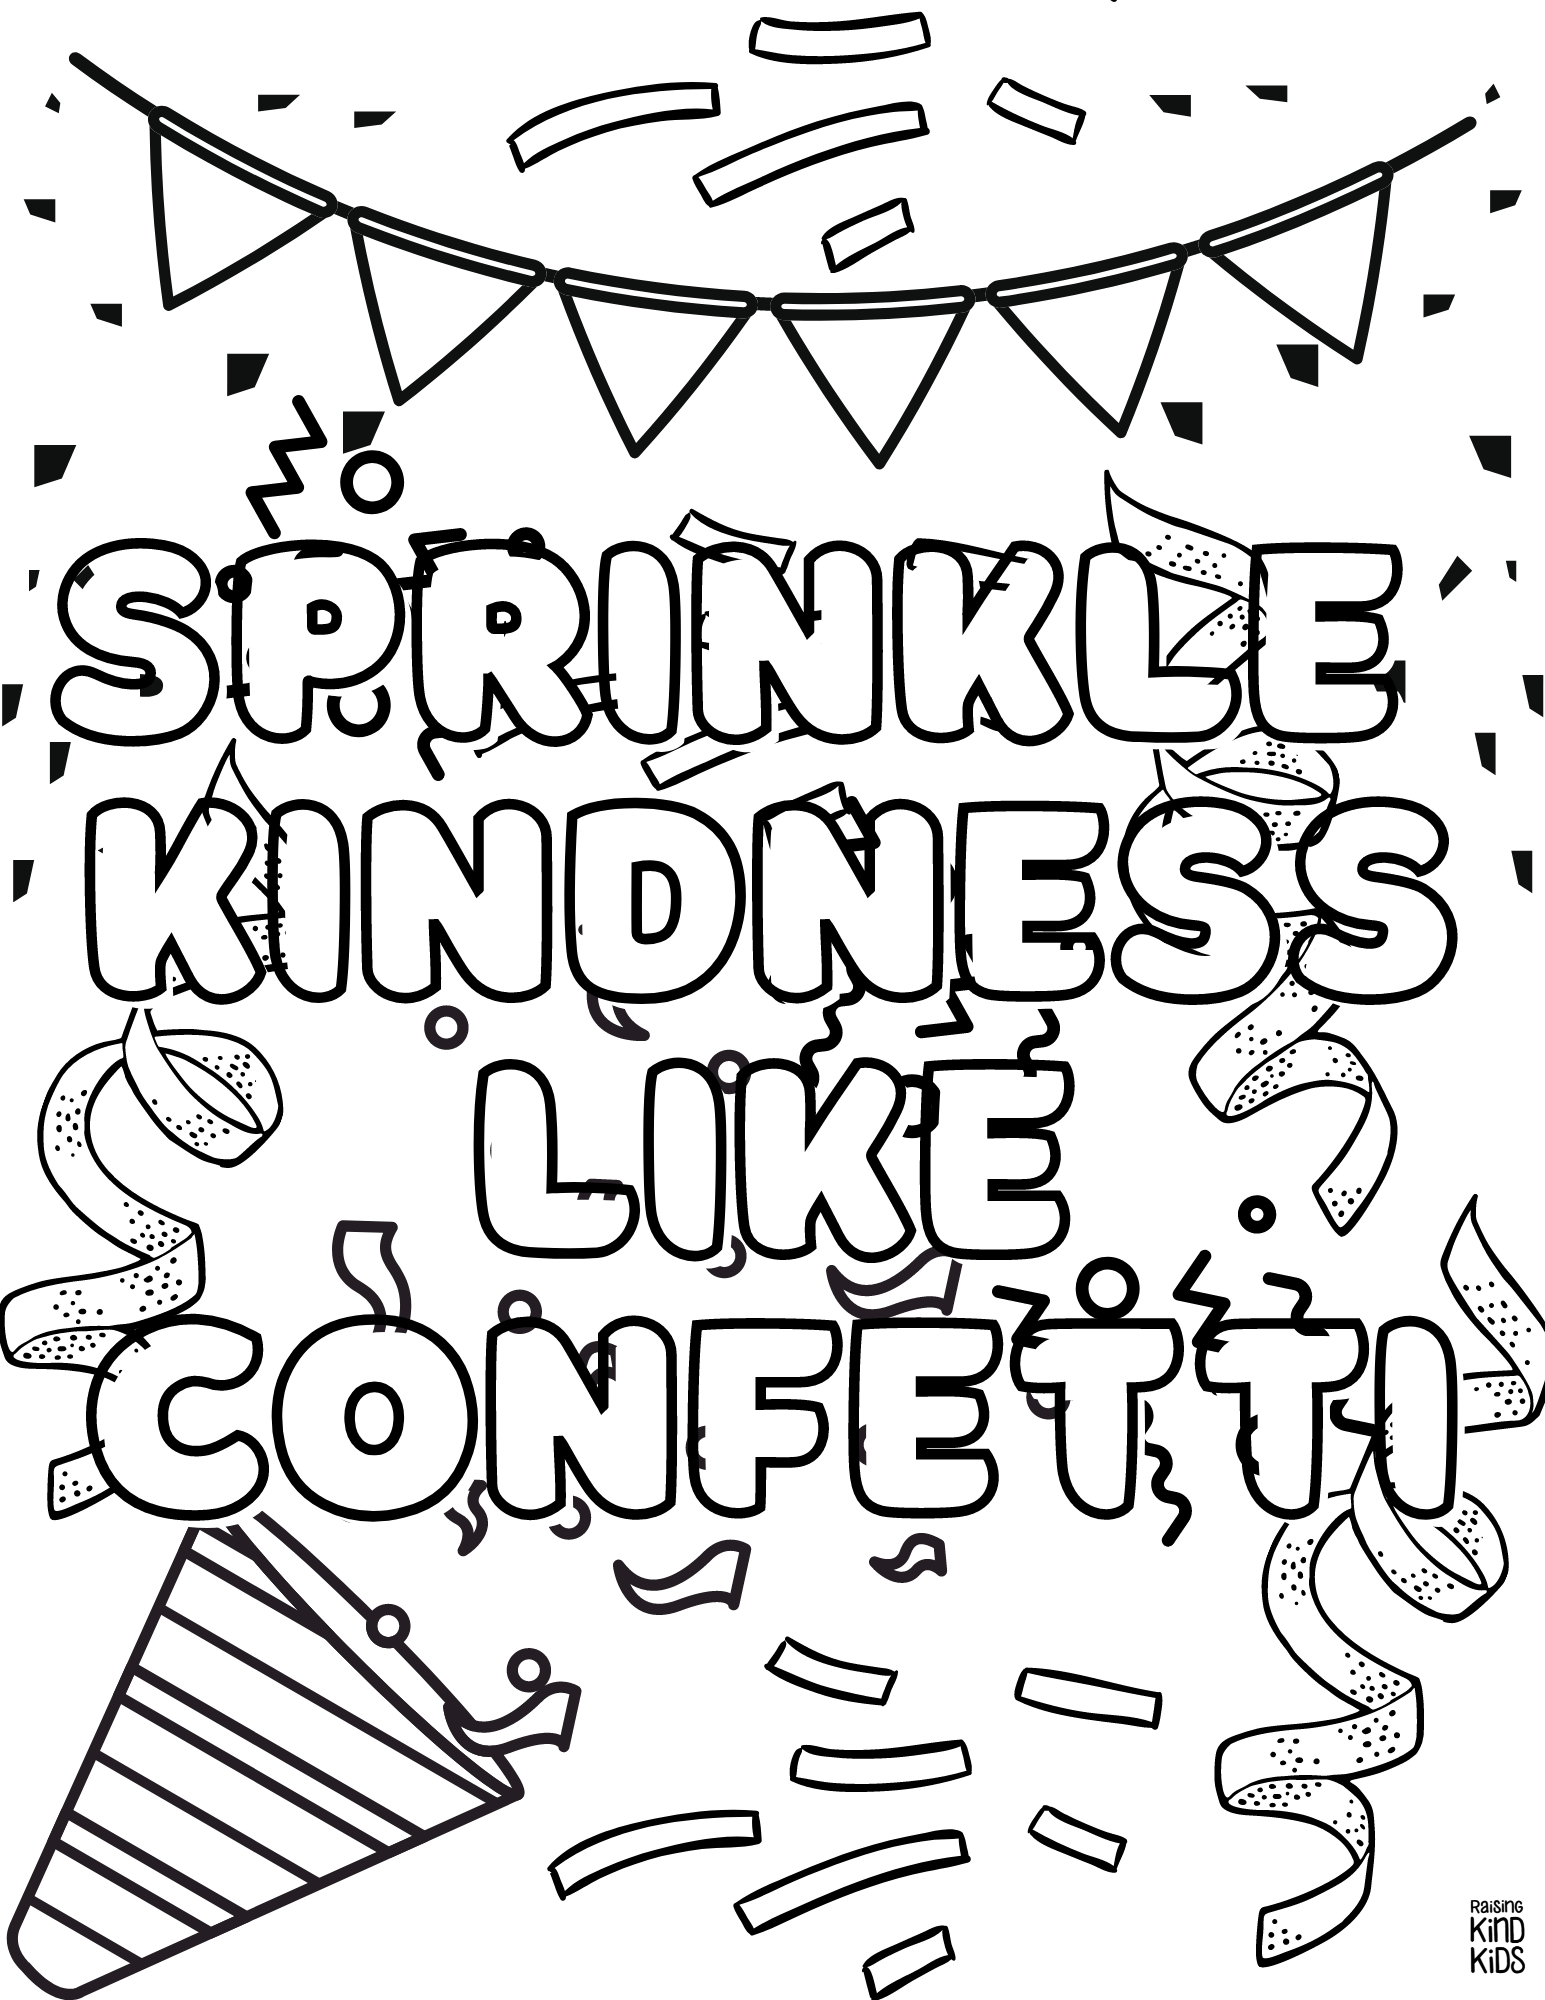 Kindness Coloring Pages 20   Coffee and Carpool Intentionally ...